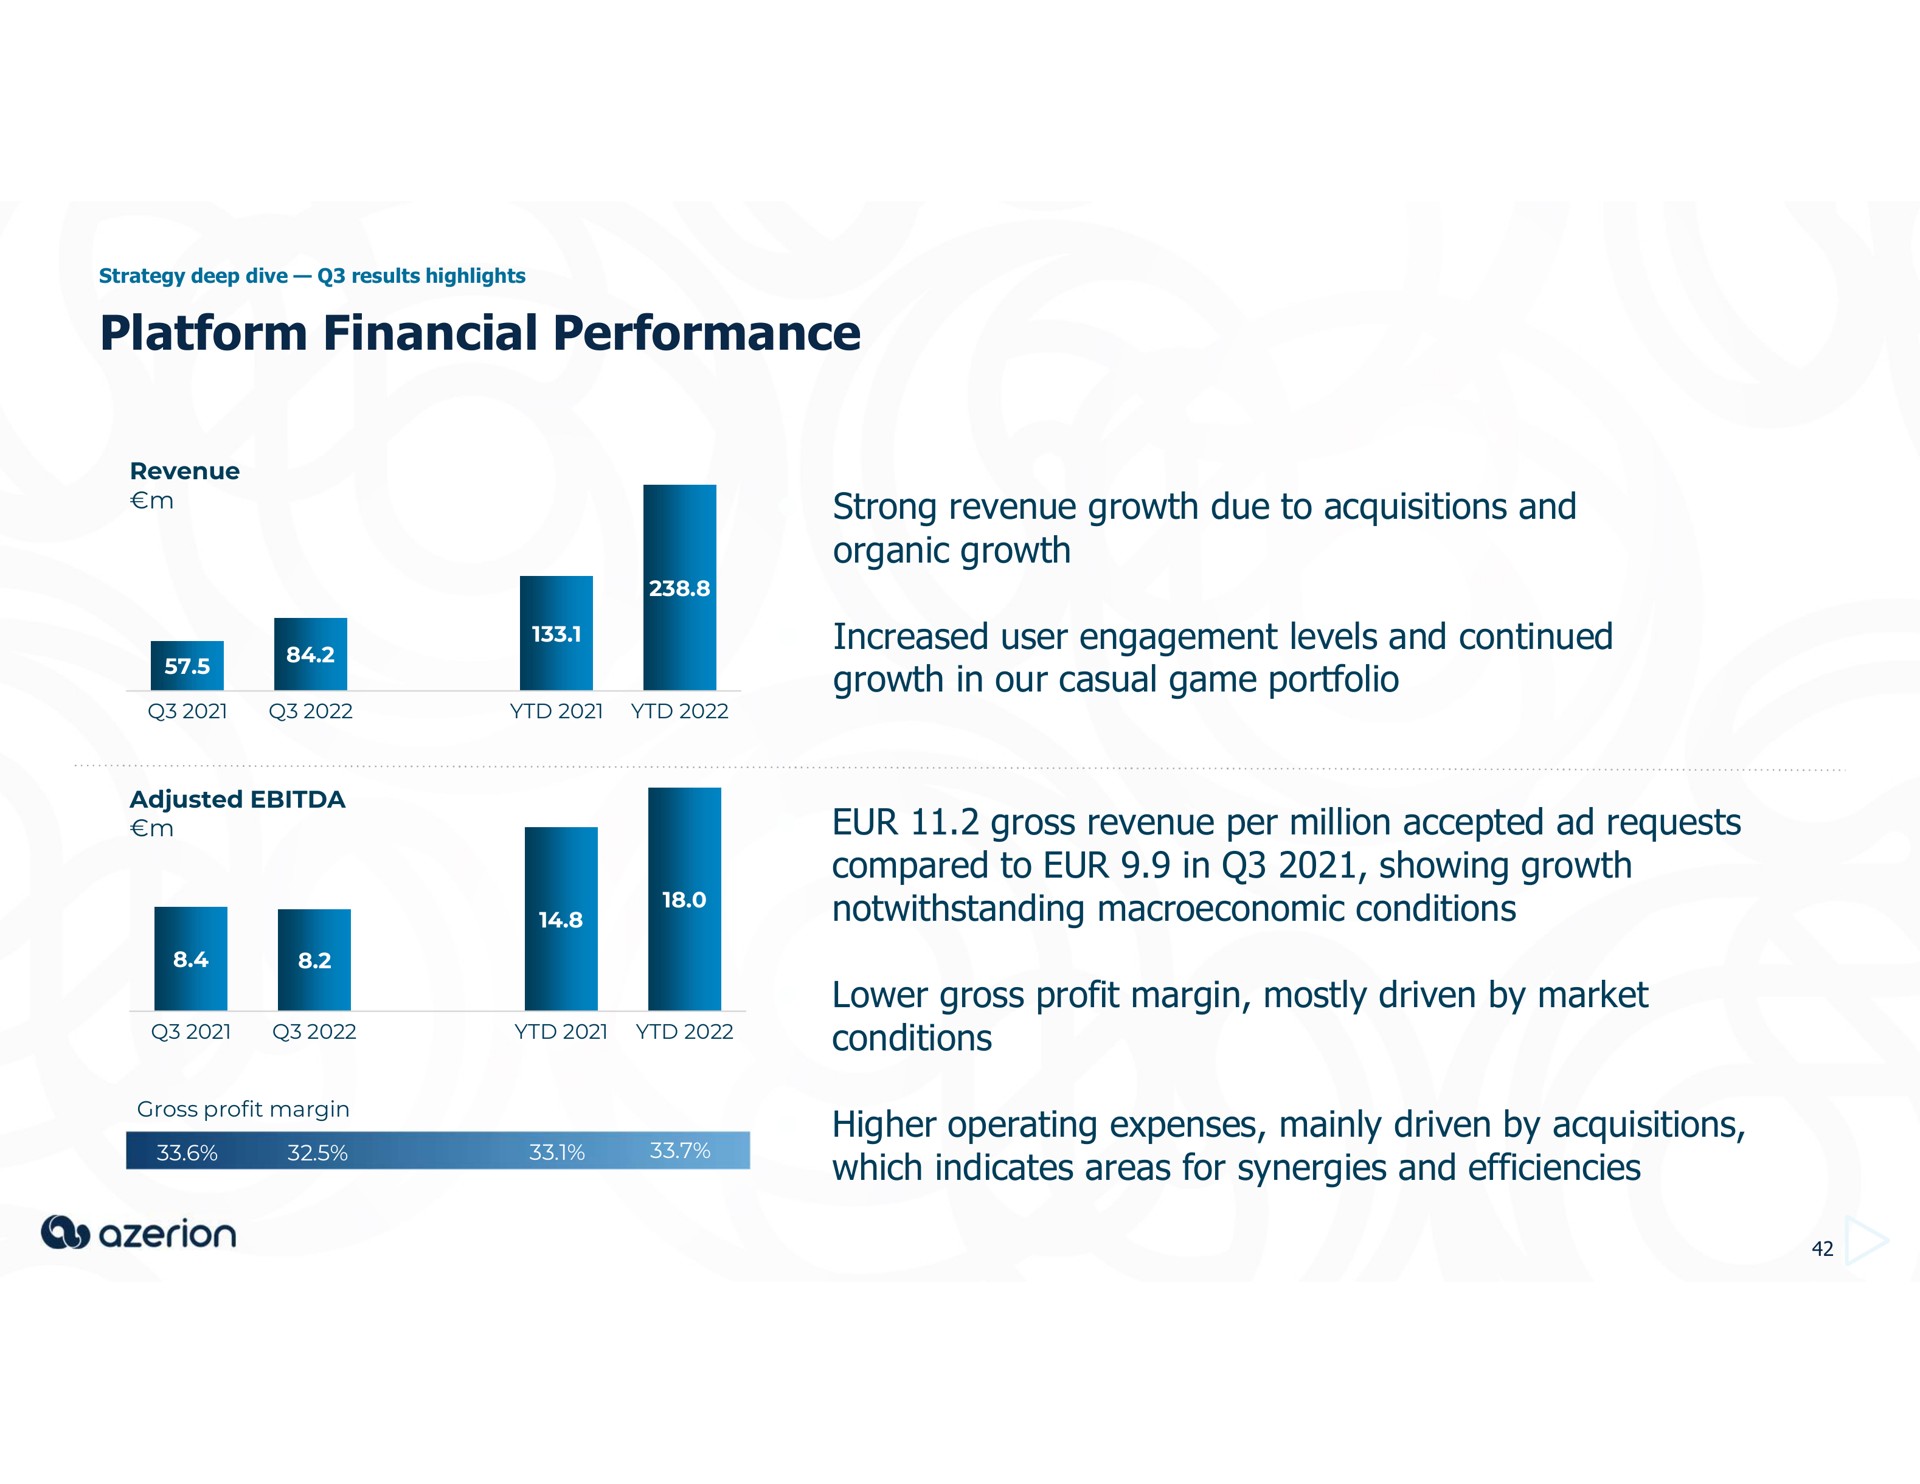 platform financial performance strong revenue growth due to acquisitions and organic growth increased user engagement levels and continued growth in our casual game portfolio gross revenue per million accepted requests compared to in showing growth notwithstanding conditions lower gross profit margin mostly driven by market conditions higher operating expenses mainly driven by acquisitions which indicates areas for synergies and efficiencies | Azerion